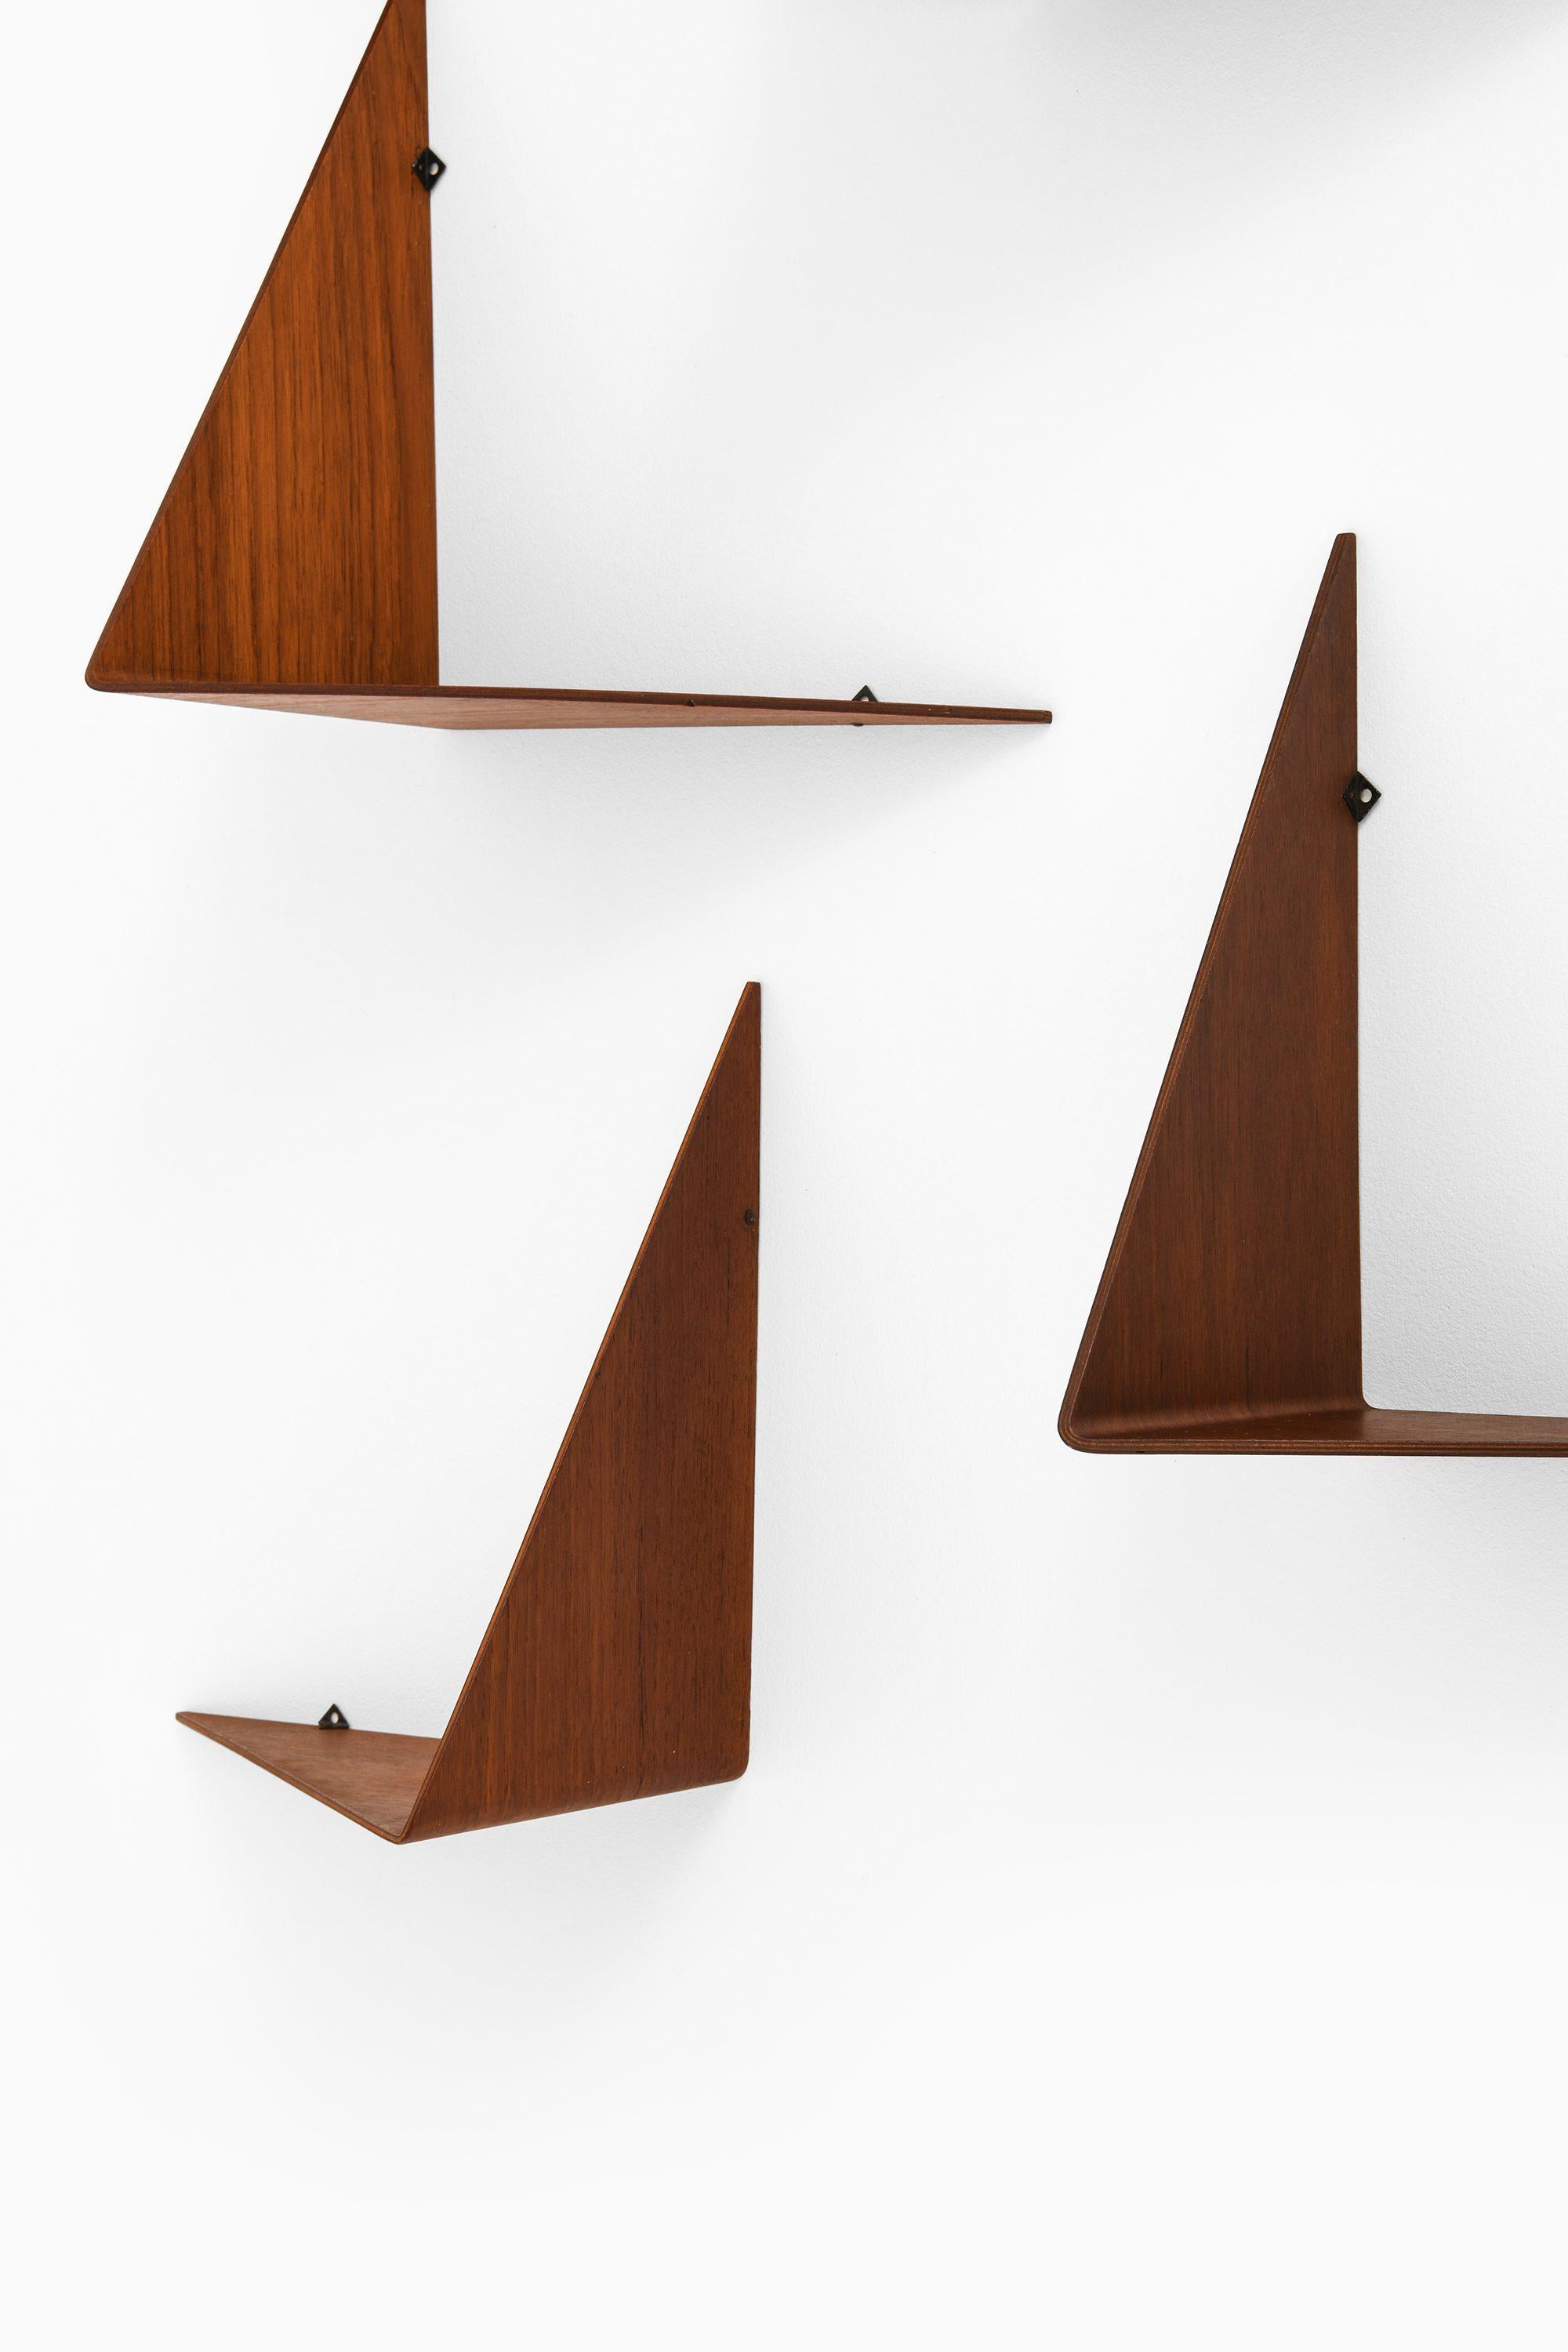 Danish Set of 6 Butterfly Shelves in Teak by Poul Cadovius, 1950's For Sale